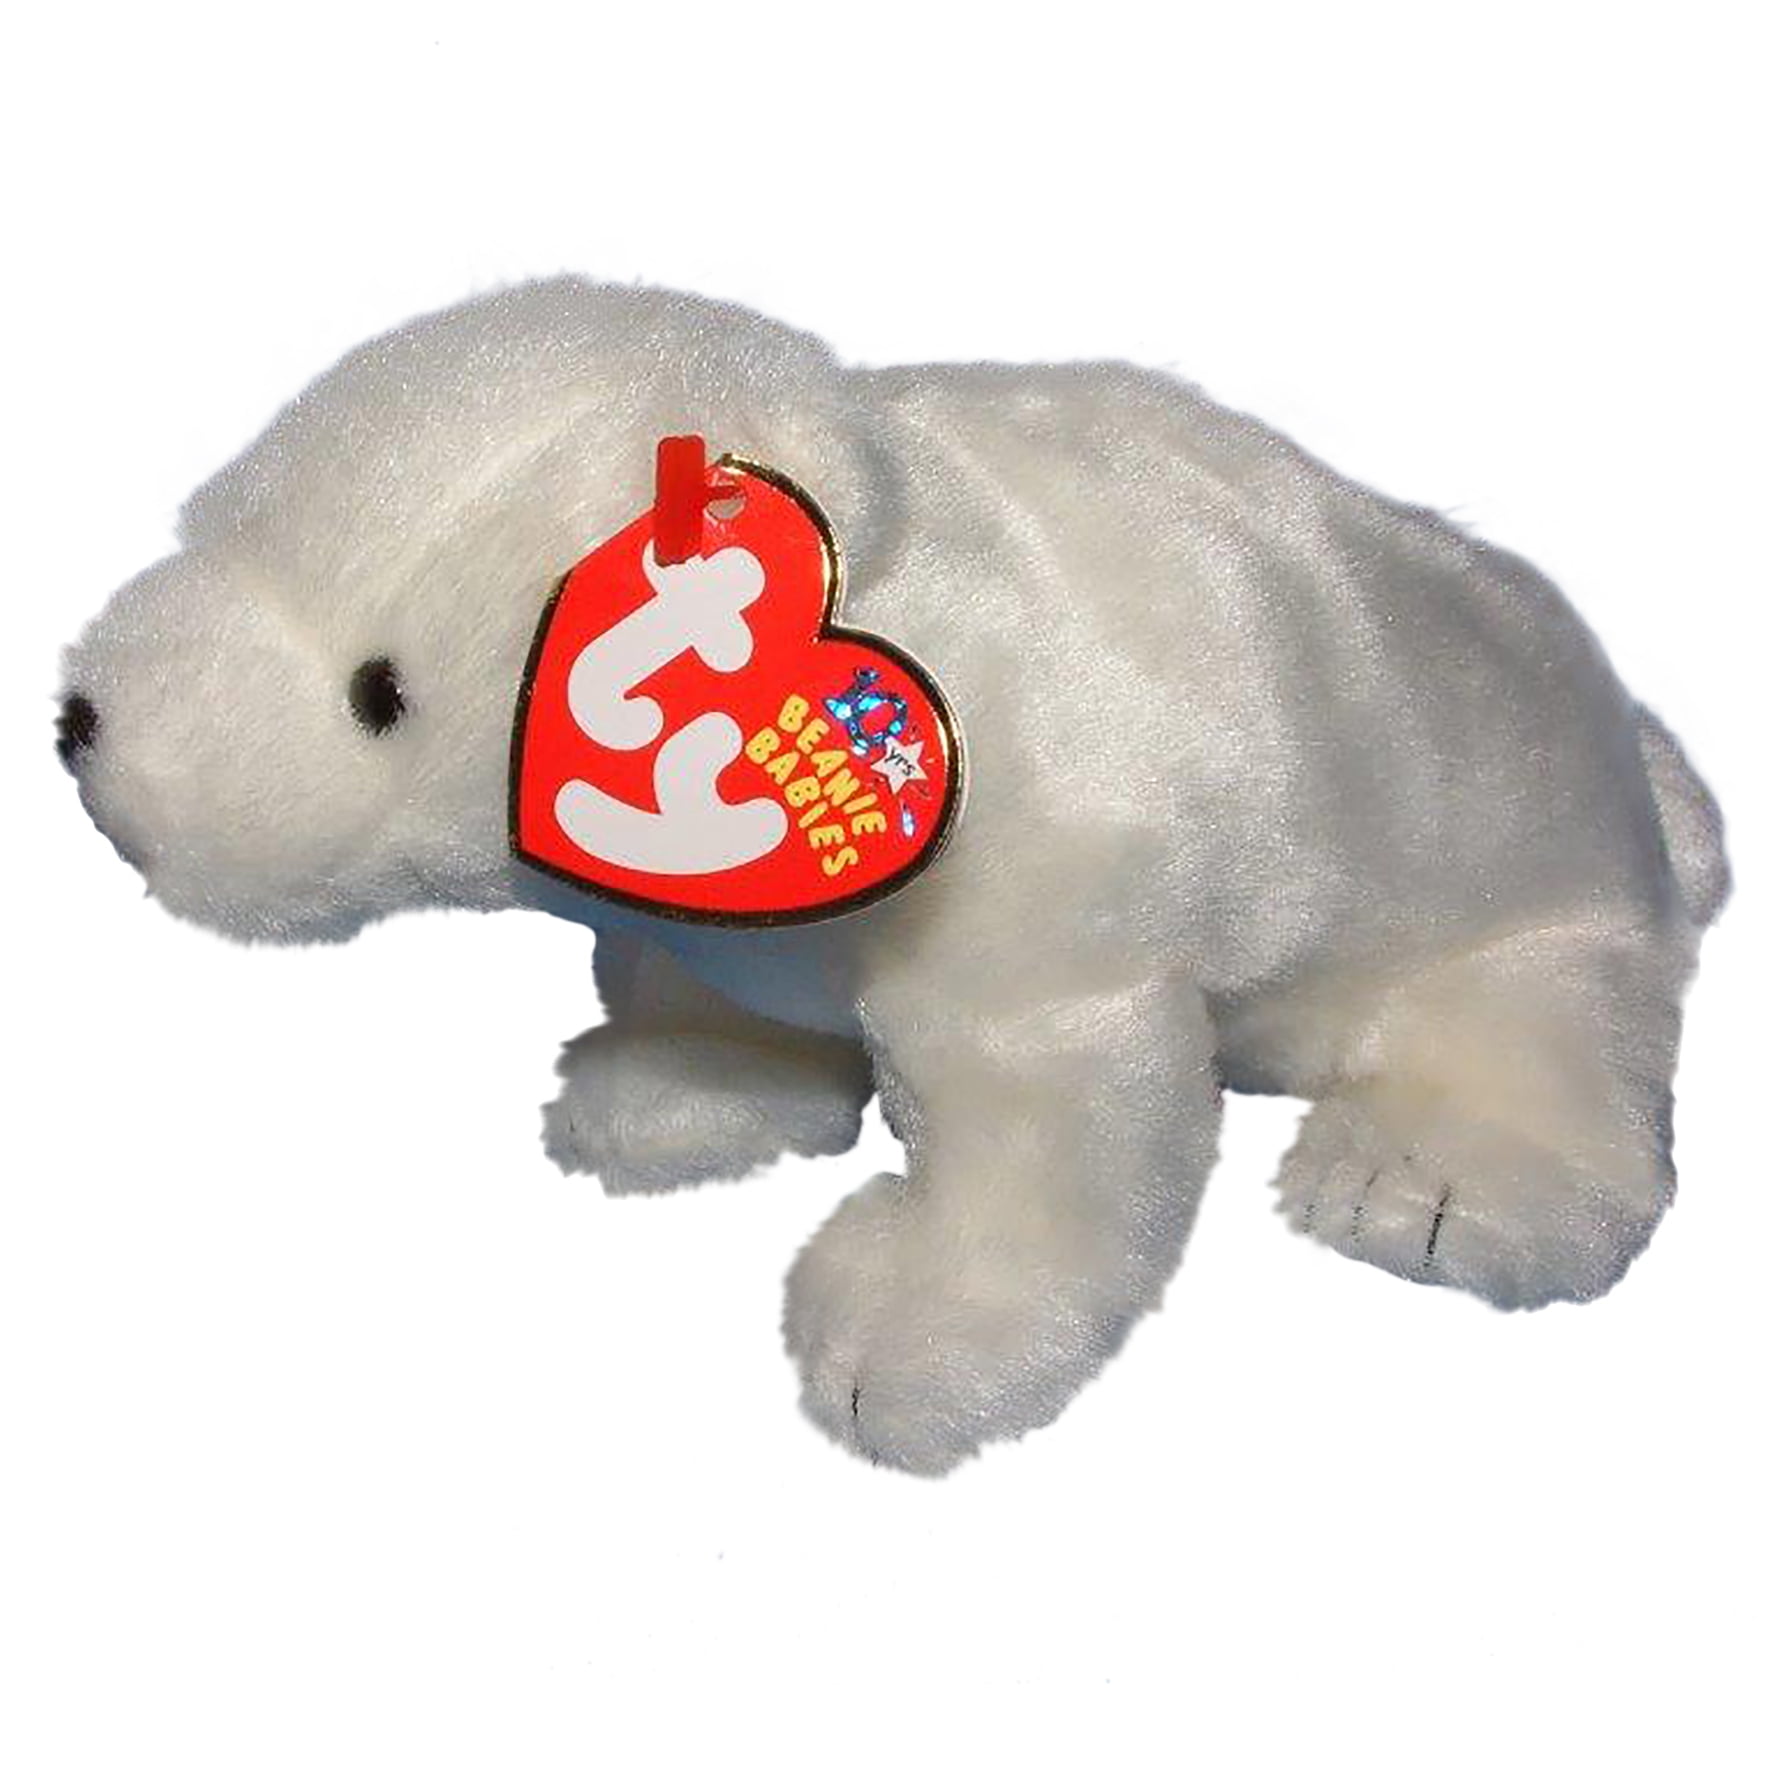 TY BEANIE BABIES  "JACK"   THE BEAR   MINT WITH MINT TAG 